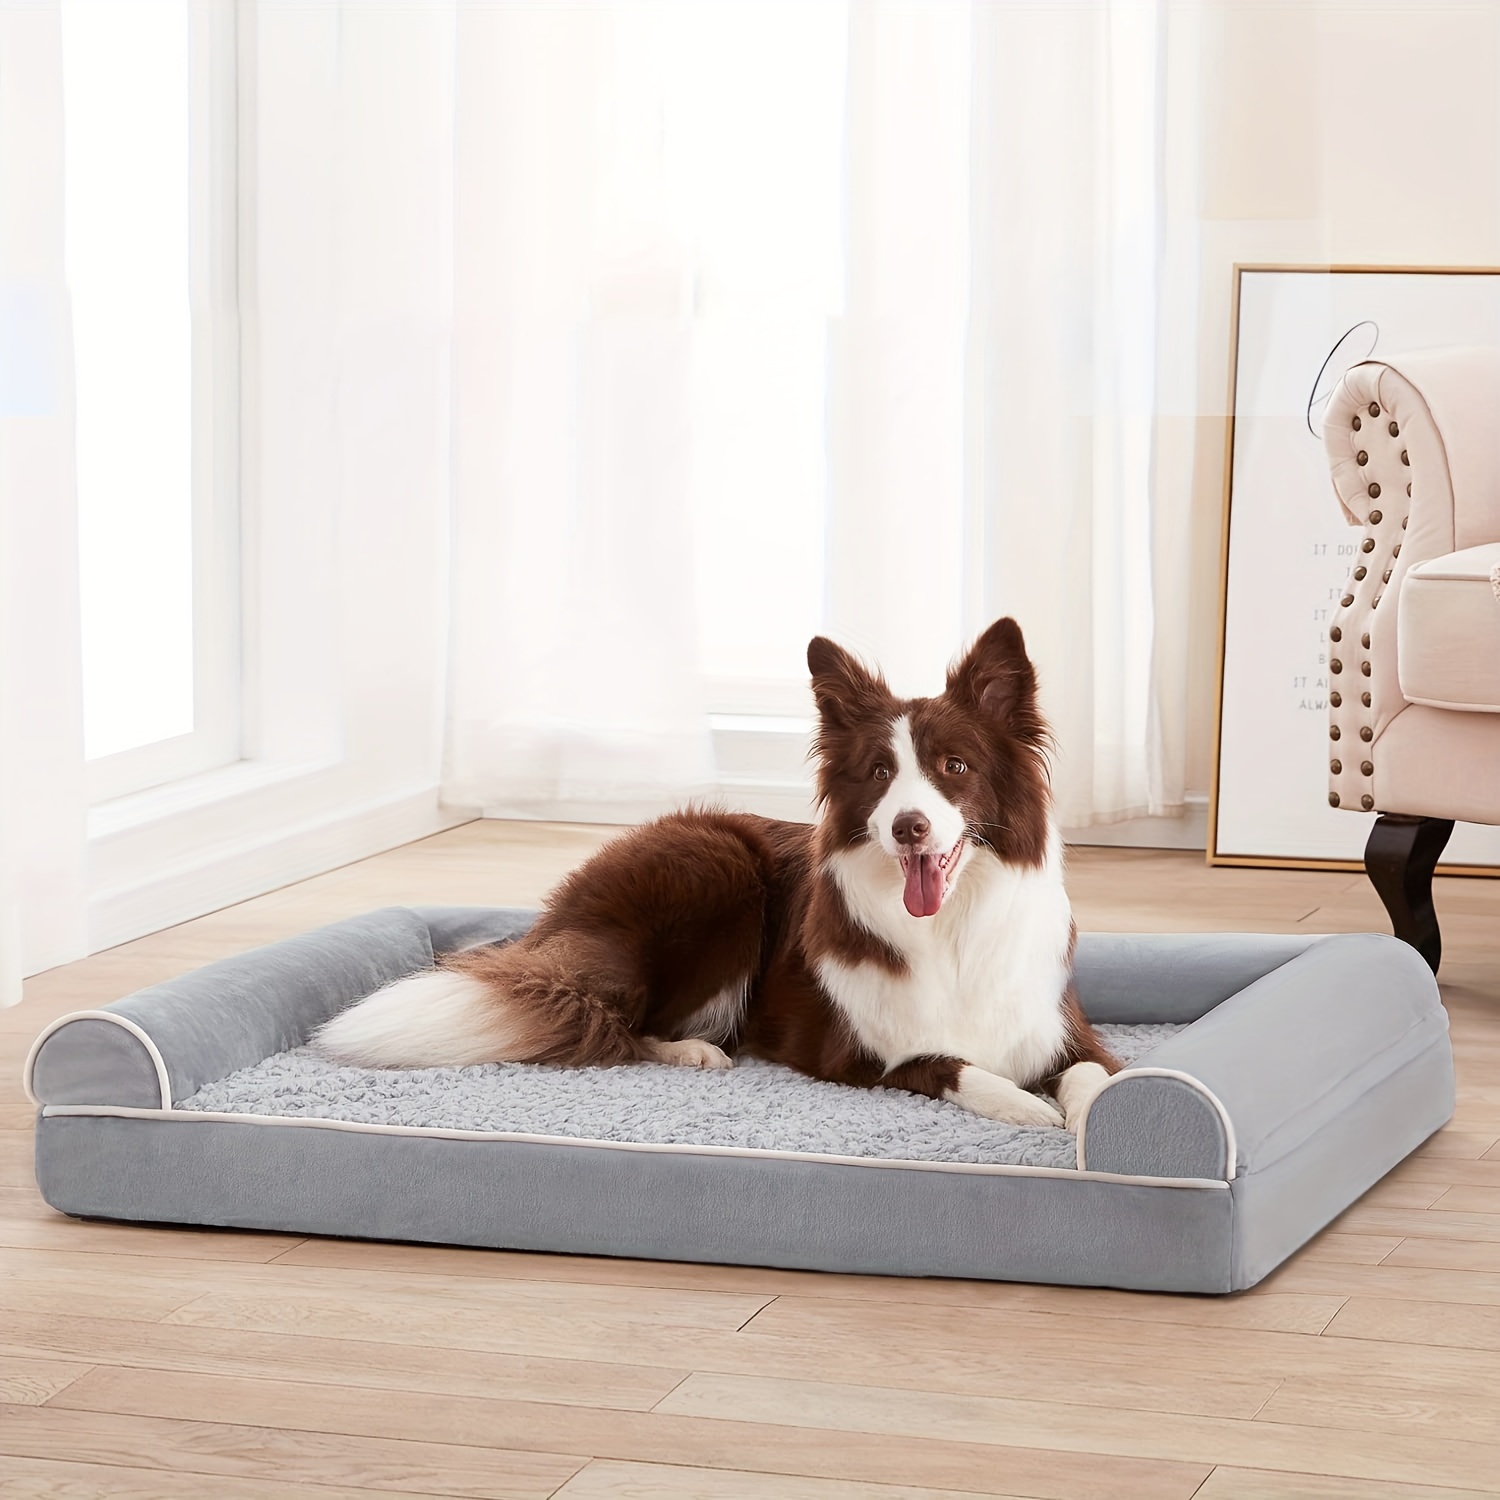 

Luxury Memory Foam Pet Sofa Bed For Dogs & Cats - Non-slip Bottom, Warm Plush Nest For Small To Extra Large Breeds Dog Pillow For Dogs Dog Sofa Bed